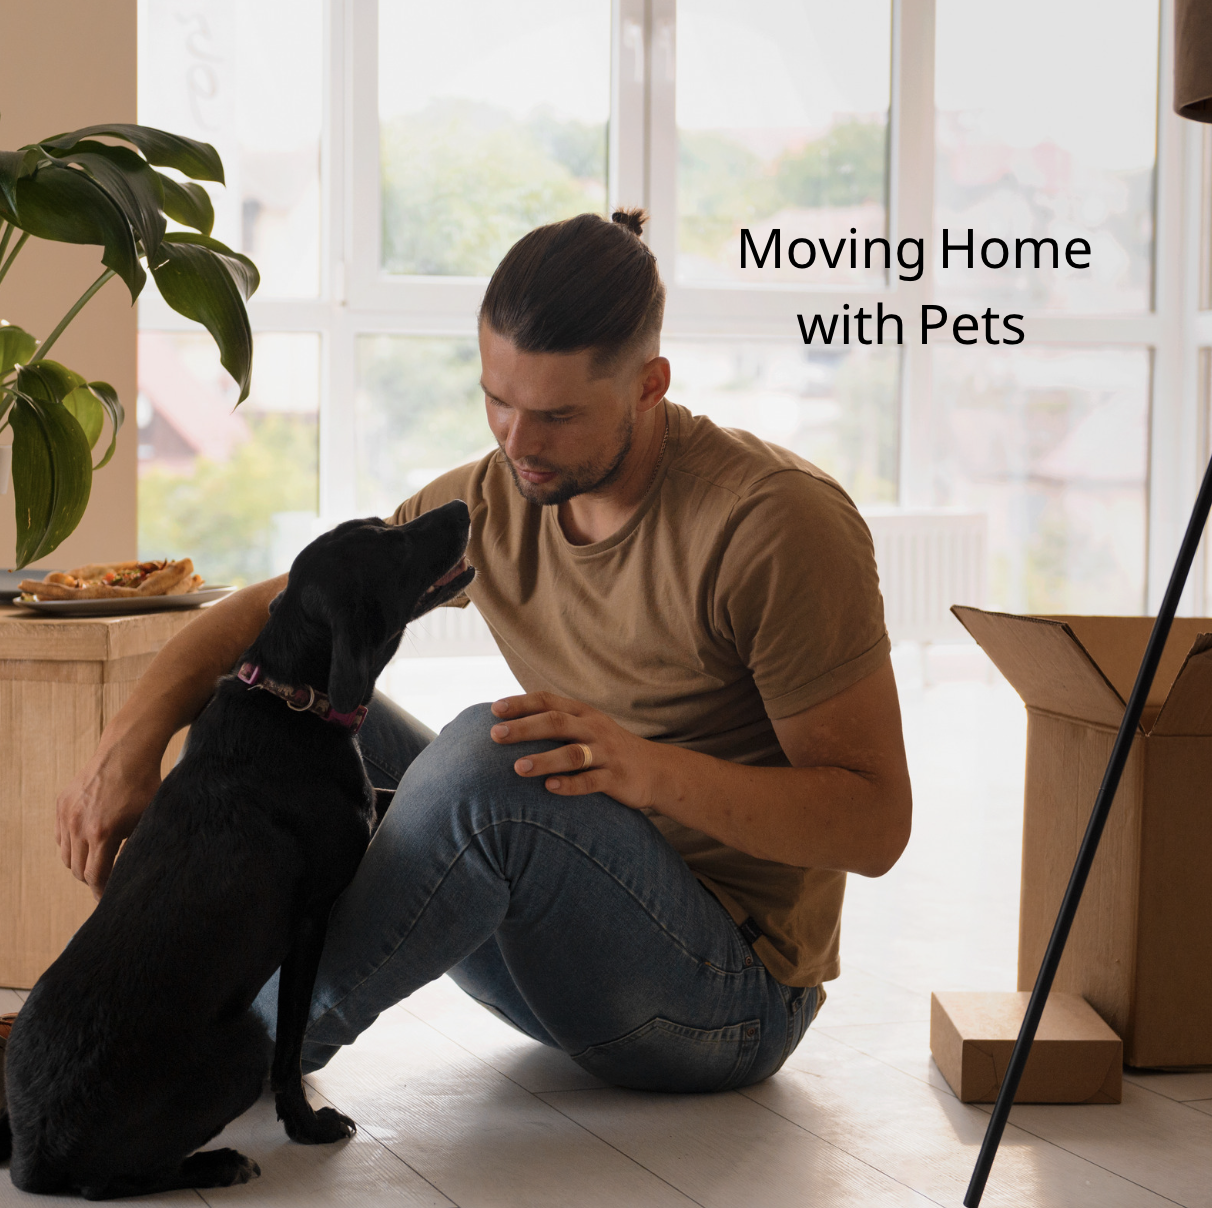 Moving home with pets